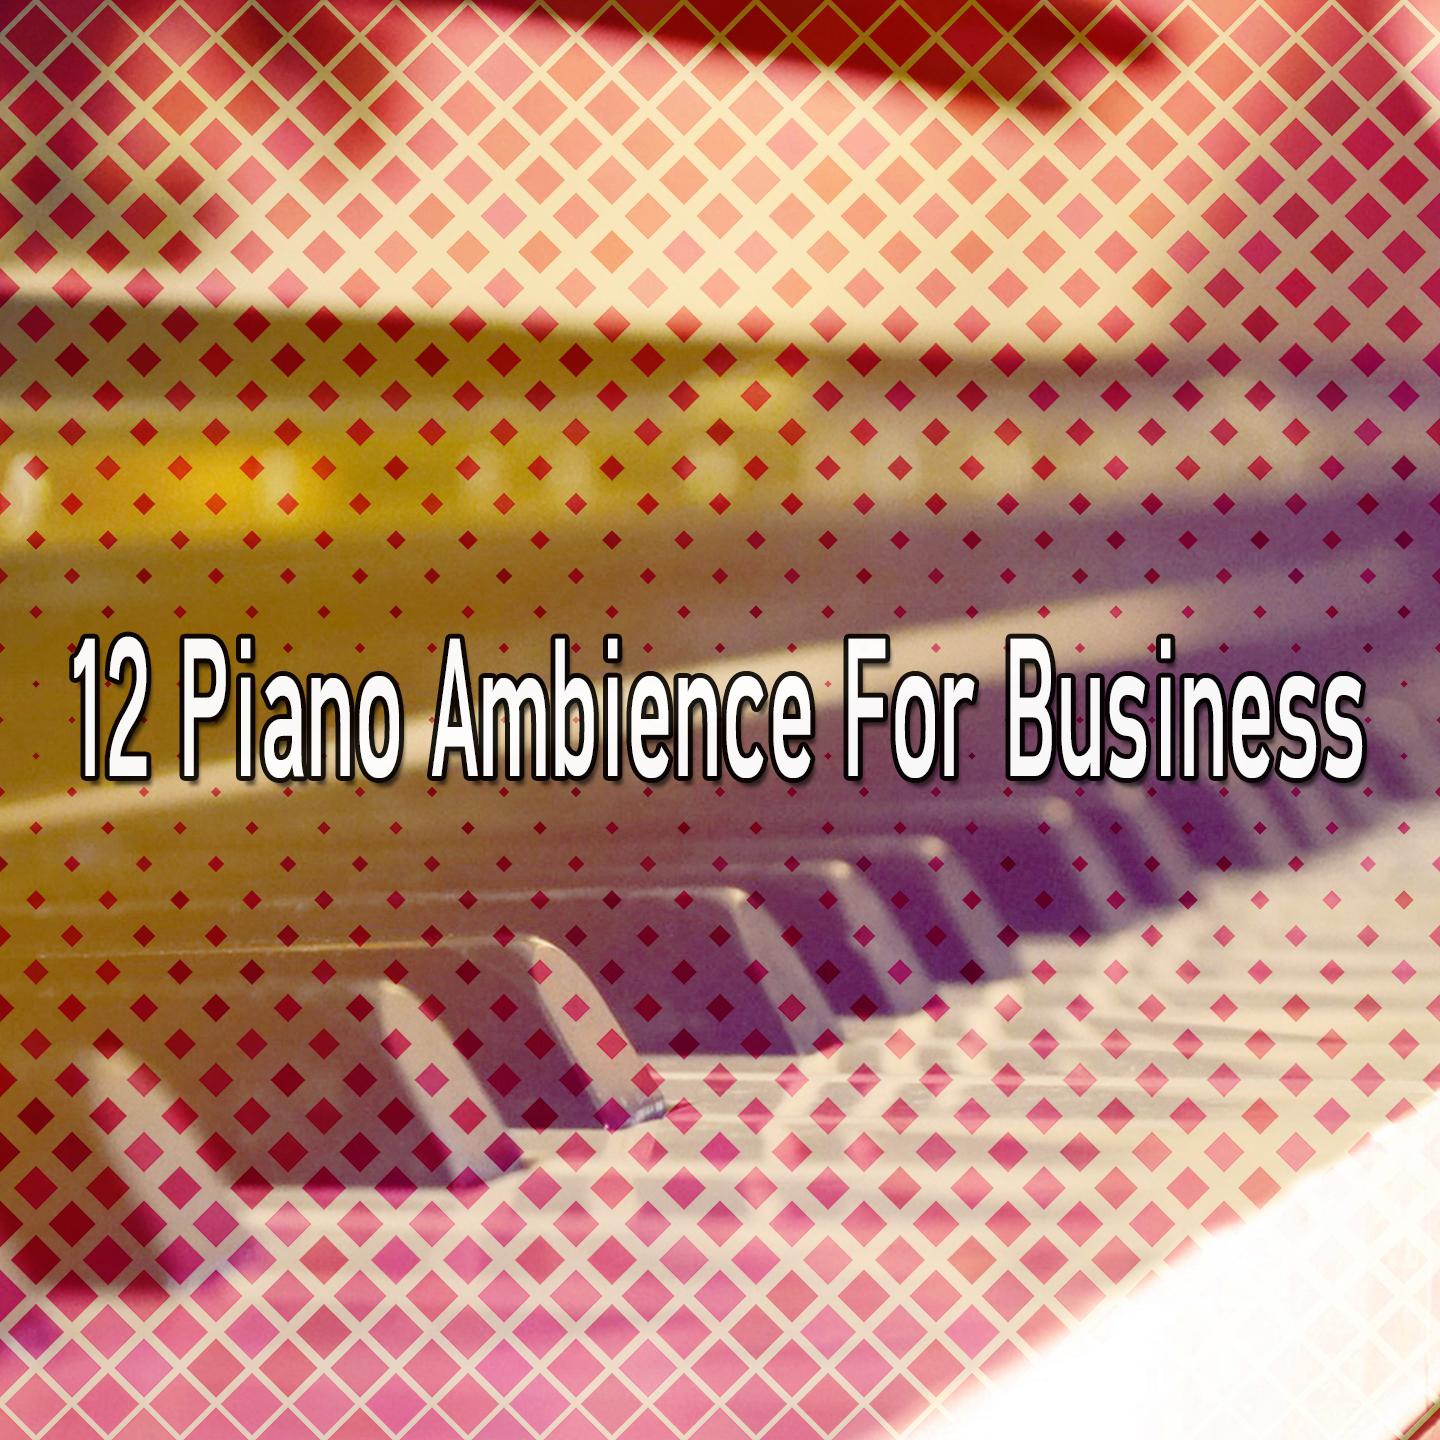 12 Piano Ambience for Business